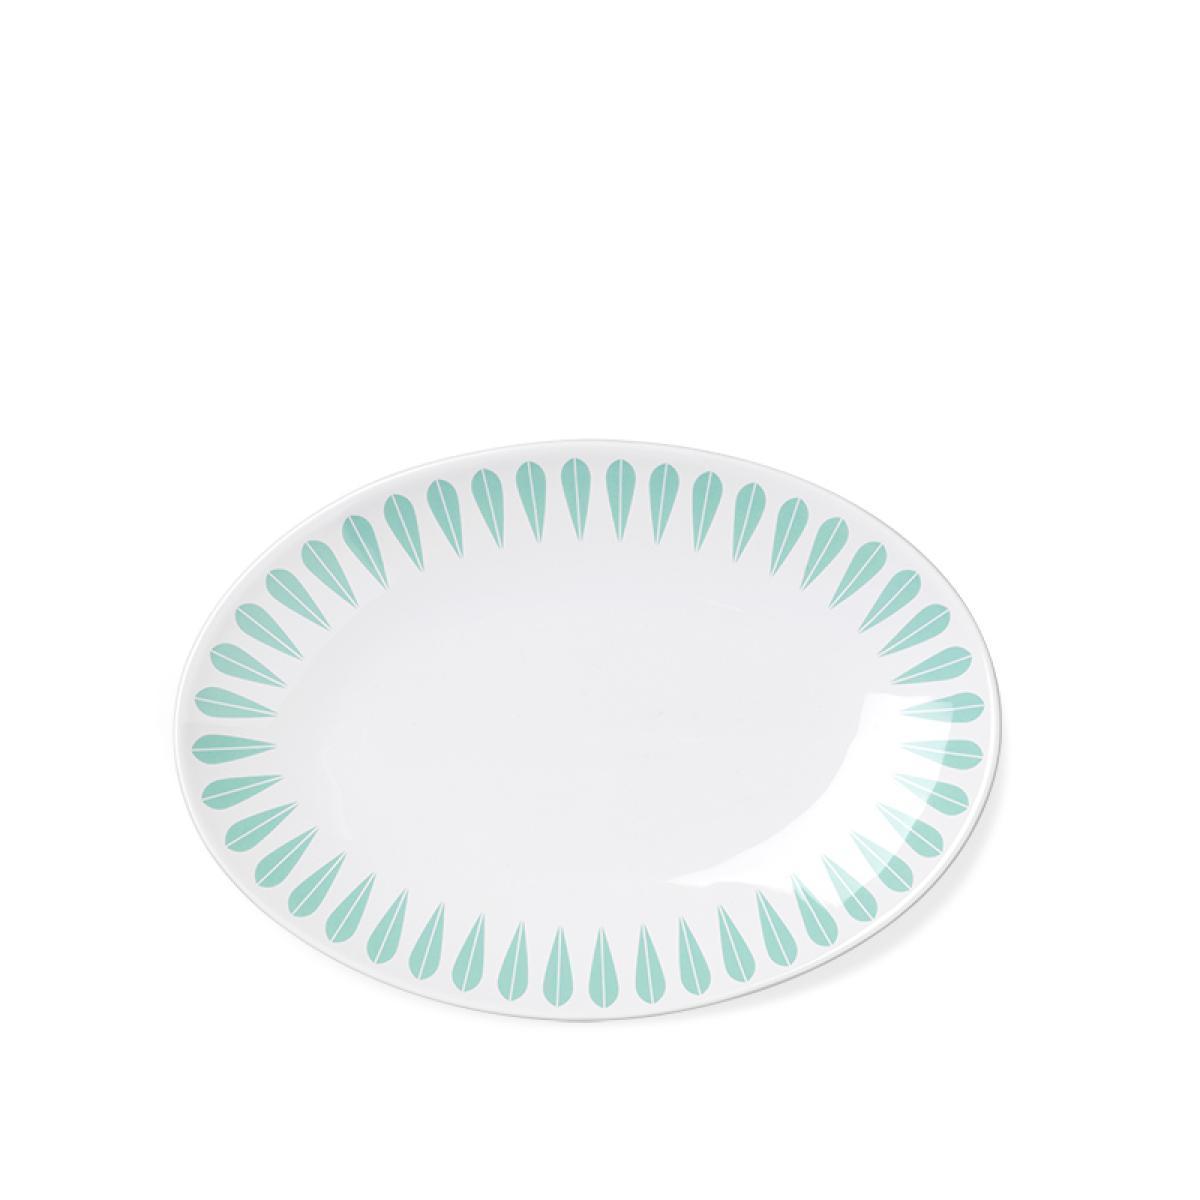 Lucie Kaas Arne Clausen Collection Servering Plate Mint Green, 29 cm